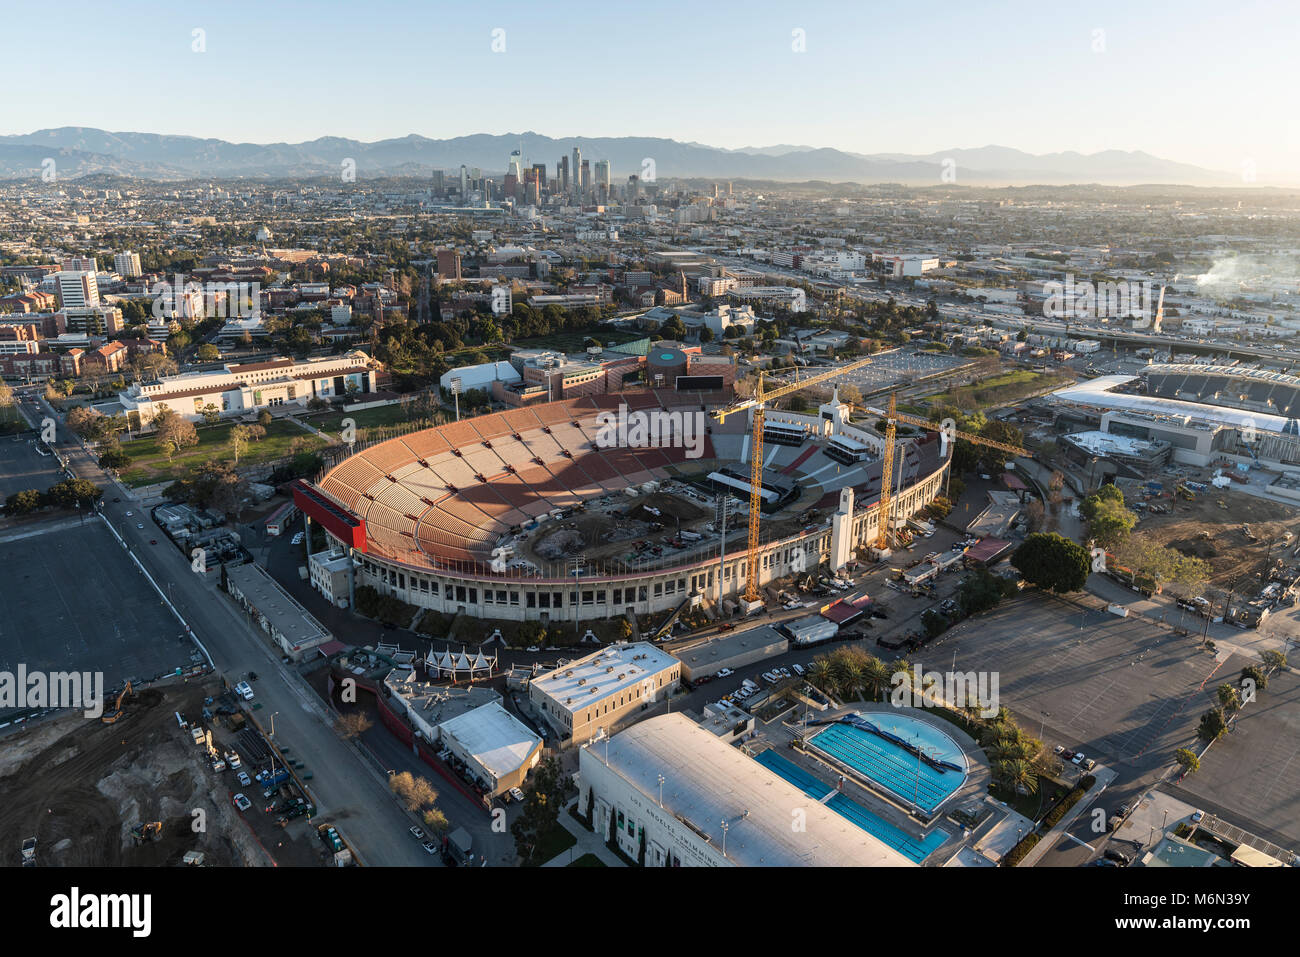 Los Angeles, California, USA - February 20, 2018:  Aerial view of event preparations at the Los Angeles Memorial Coliseum in Exposition Park near USC  Stock Photo